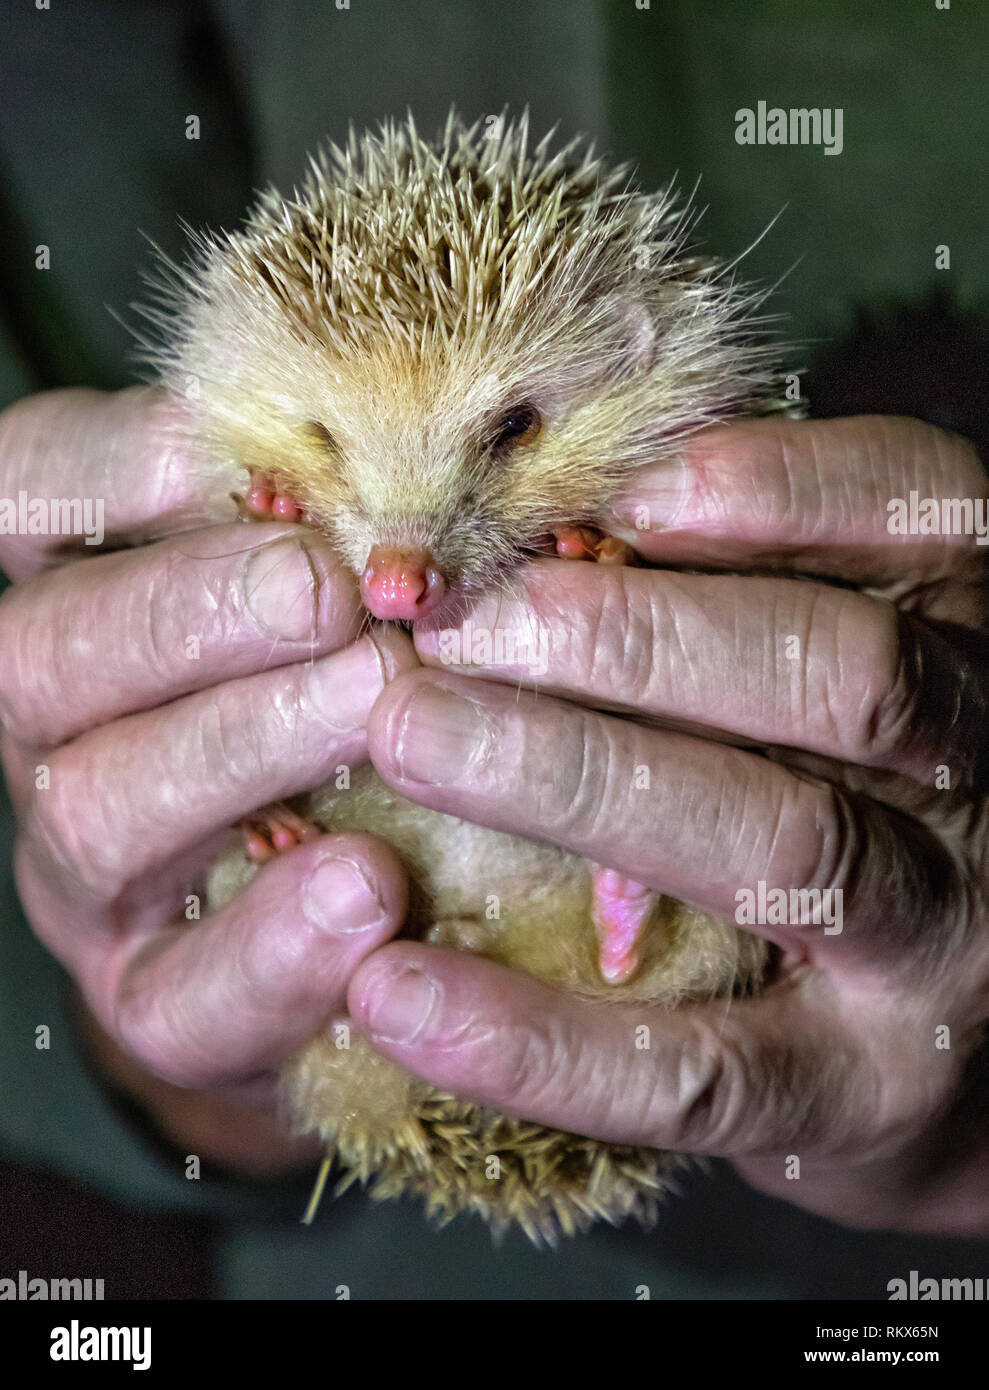 An Alderney blonde hedgehog being help up to show pink nose and feet. These hedgehogs have little fear of humans. Stock Photo